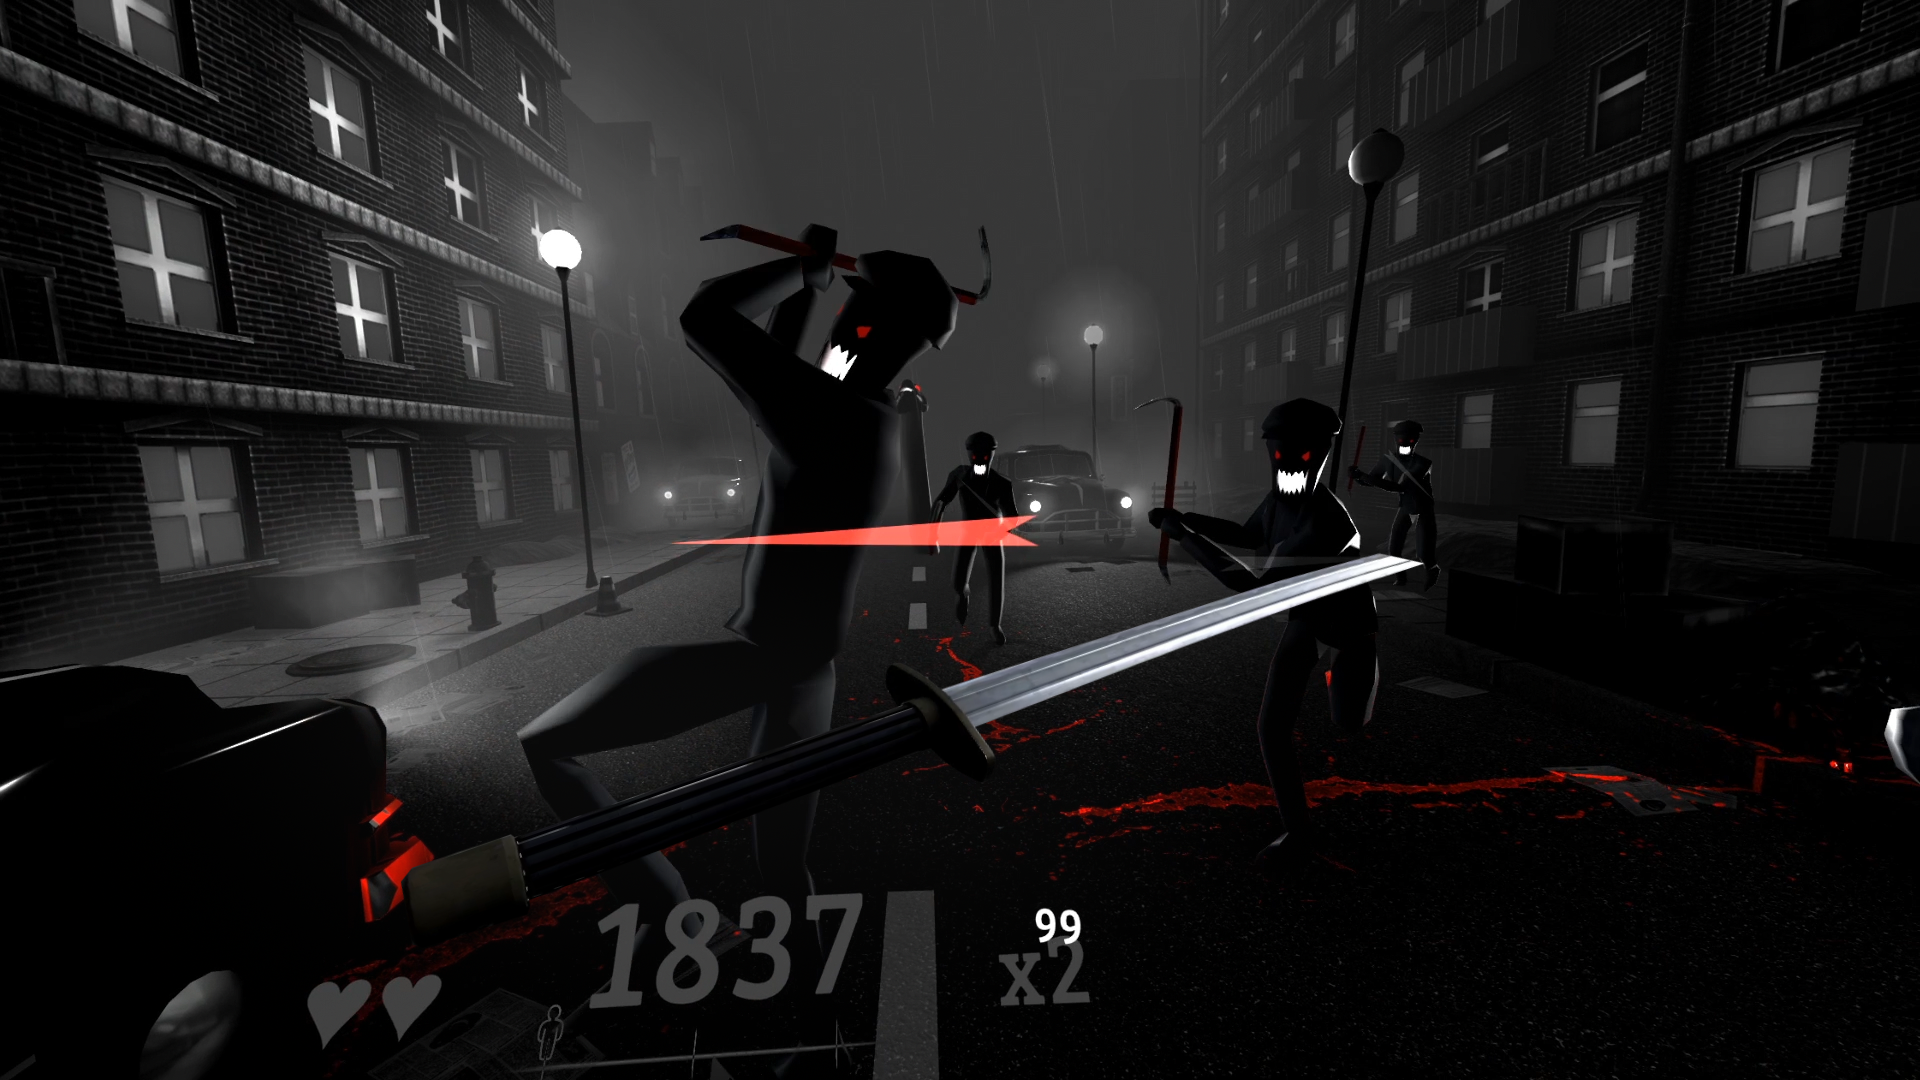 Vr Rhythm Game Immerses You In A Violent Crime Drama Vrscout - beat rhythm games in roblox